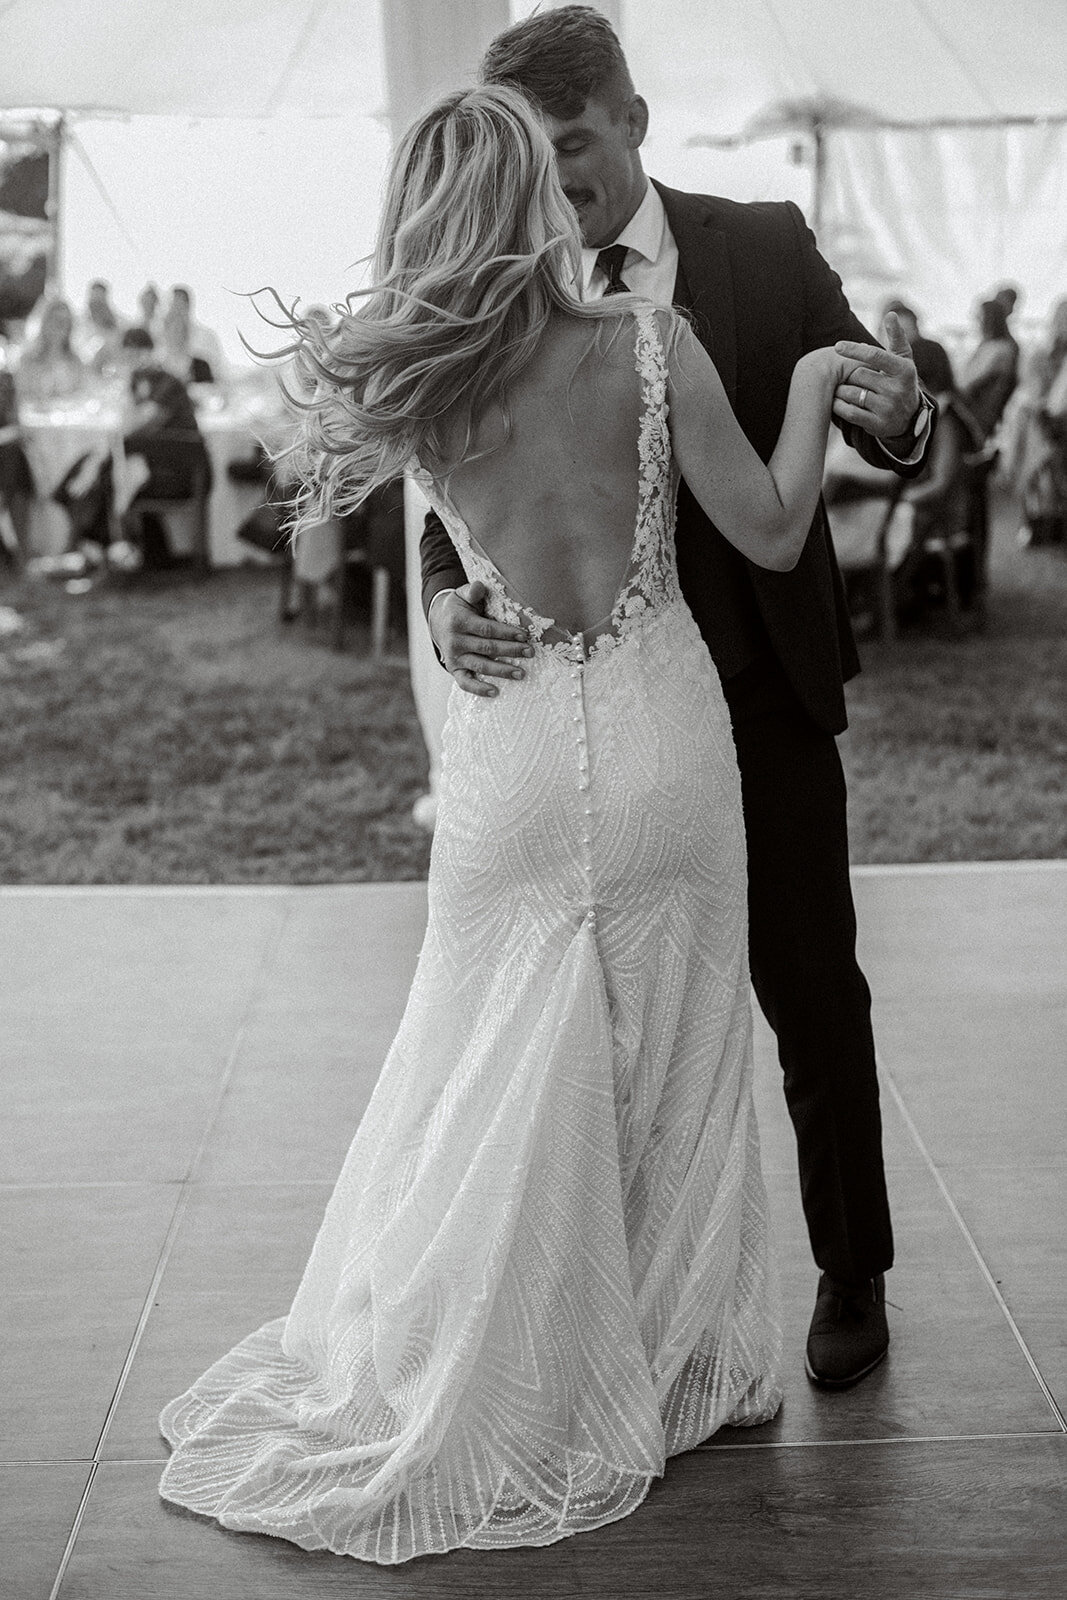 Bride and groom first dance at Dolphin Bay Resort in Pismo Beach, CA